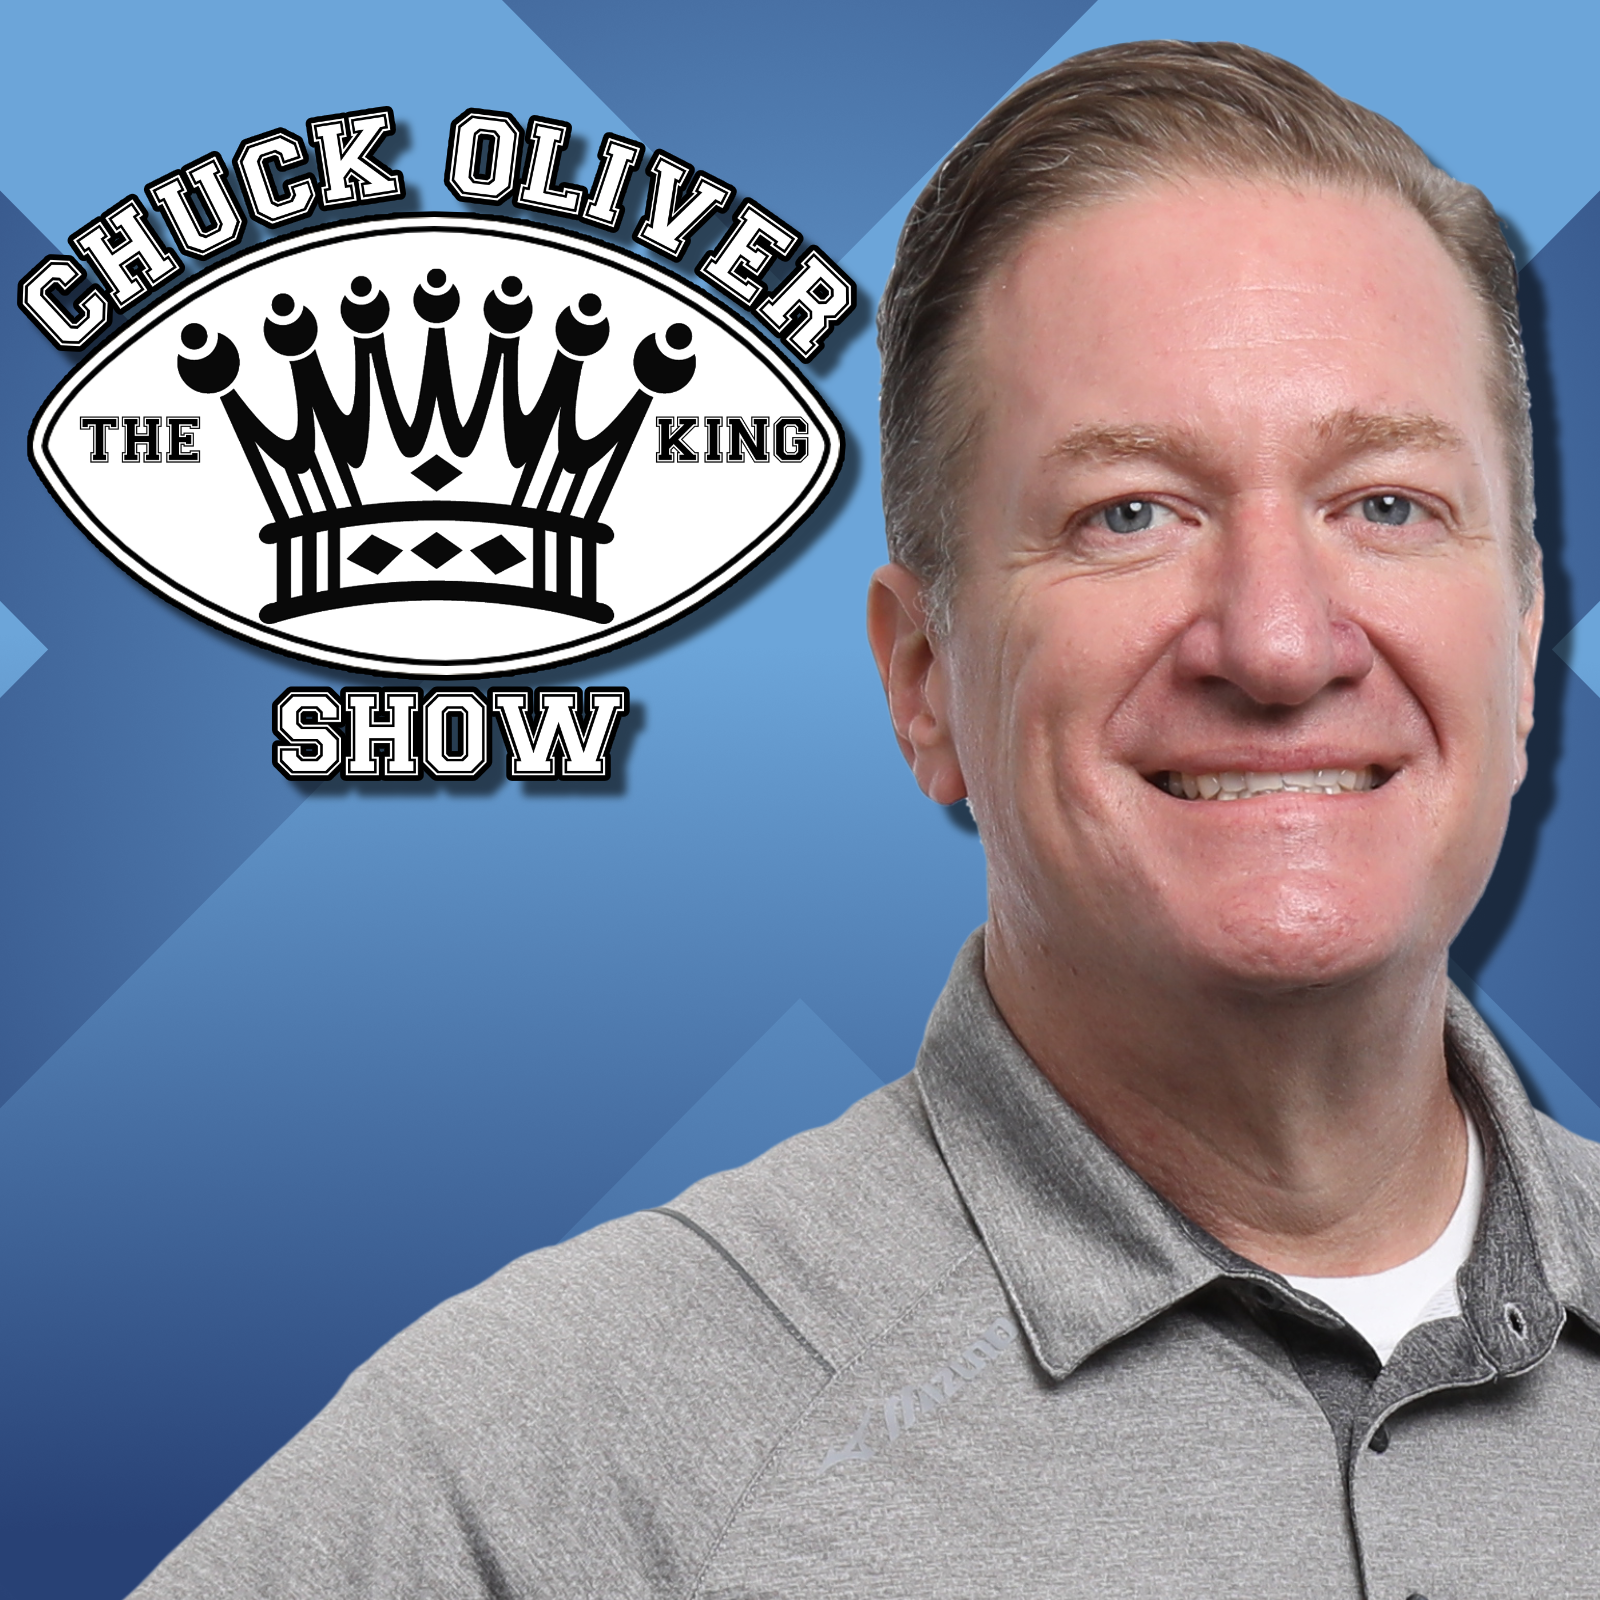 CHUCK OLIVER SHOW 2-19 FRIDAY HOUR 2